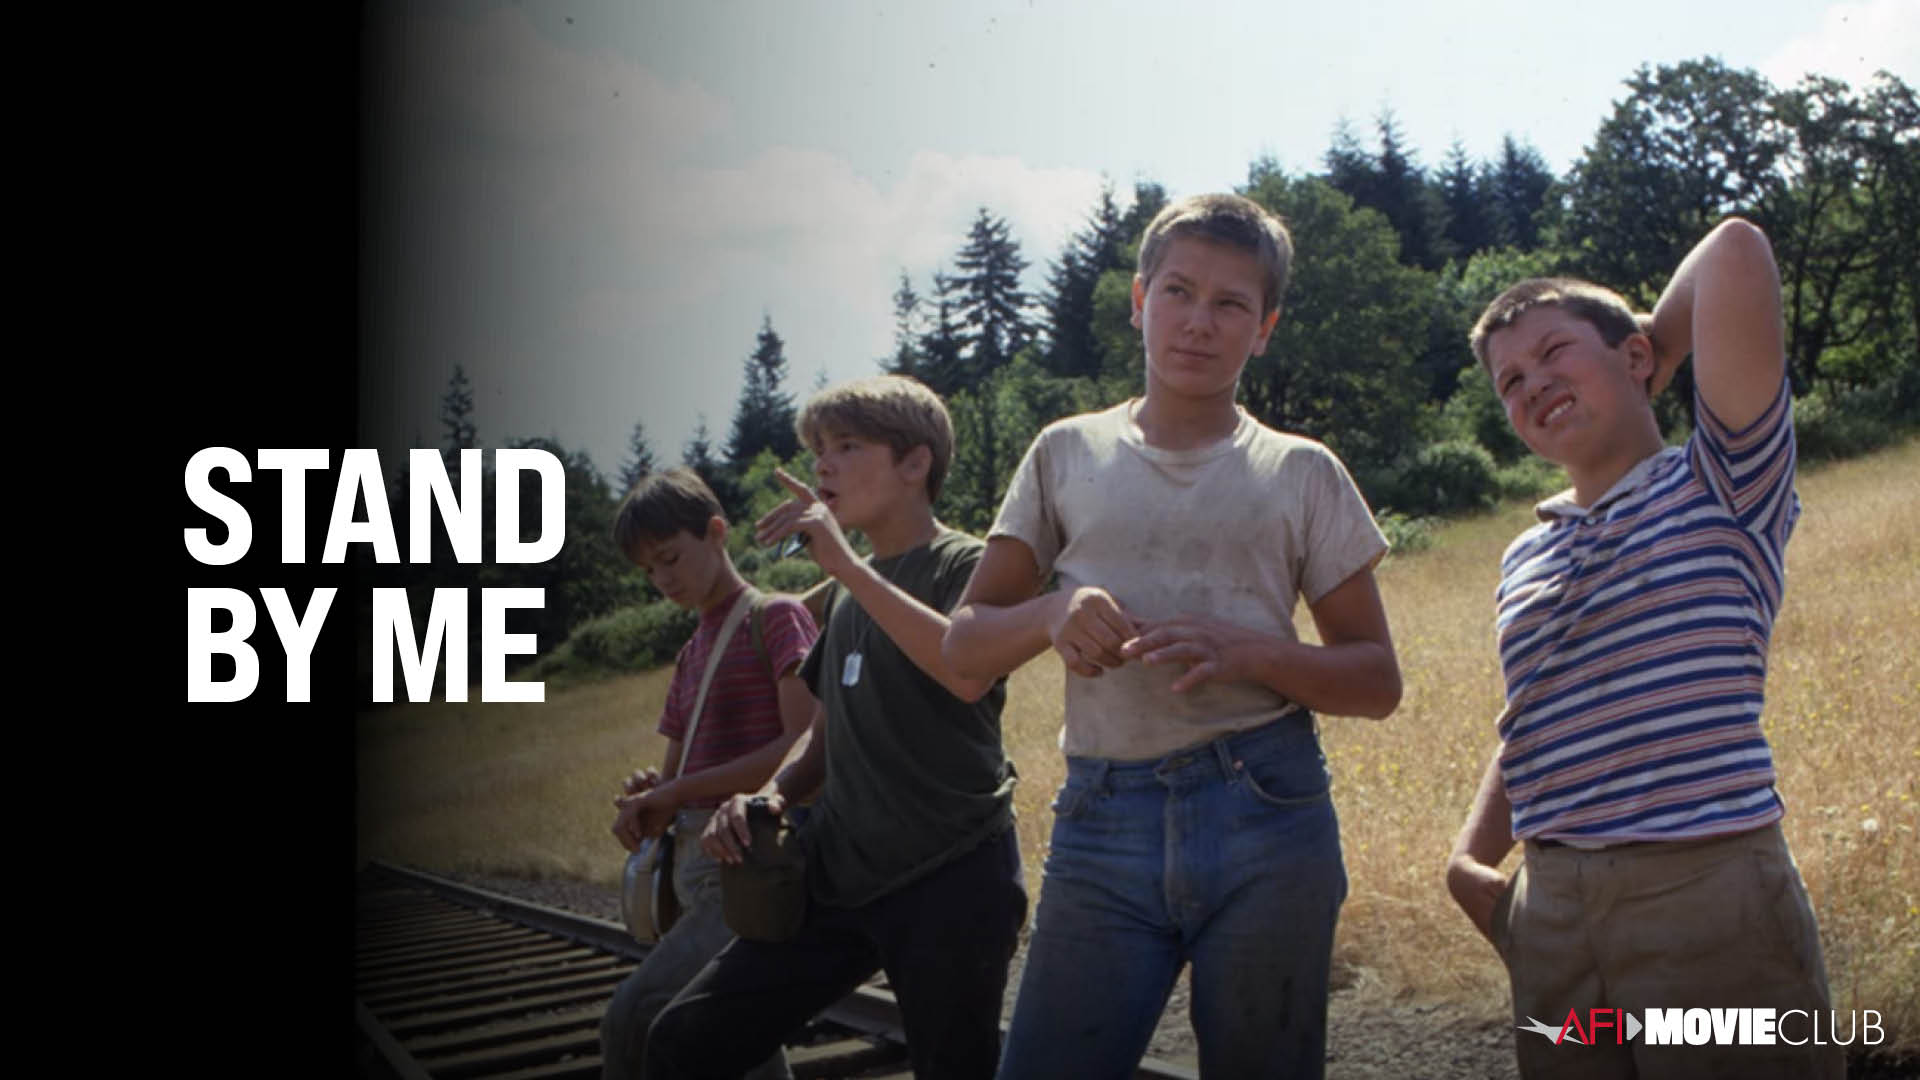 Stand By Me Film Still - River Phoenix, Corey Feldman, Wil Wheaton, and Jerry O'Connell